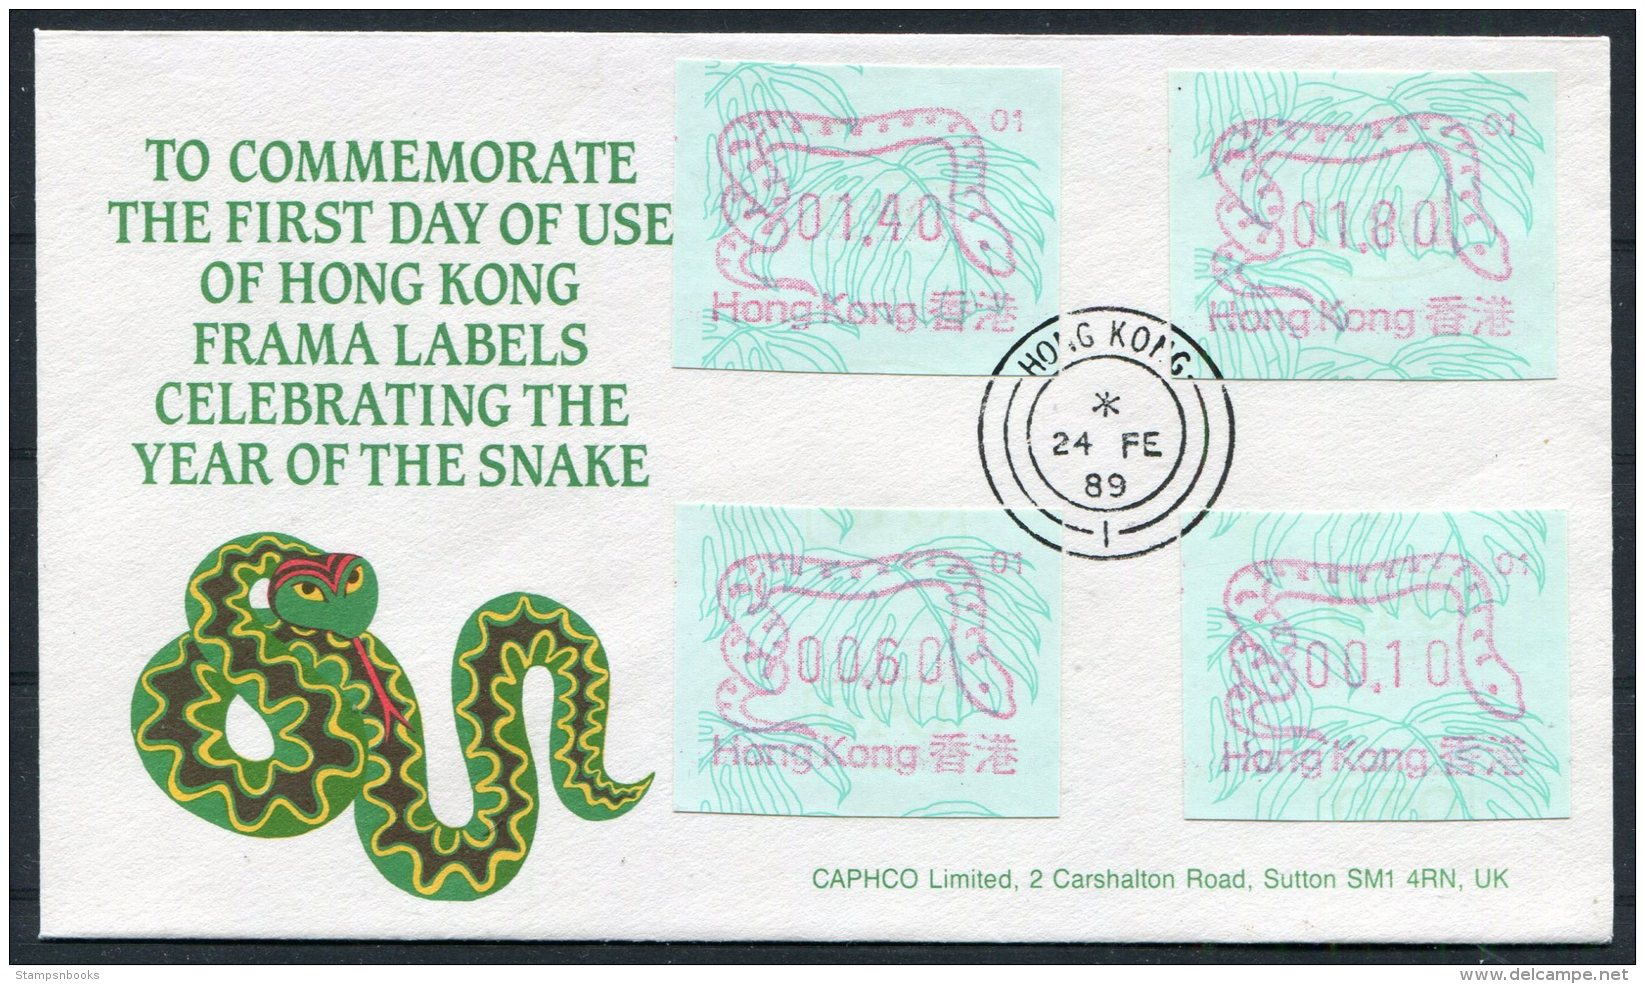 1989 Hong Kong FRAMA ATM Year Of The Snake FDC. First Day Cover - FDC